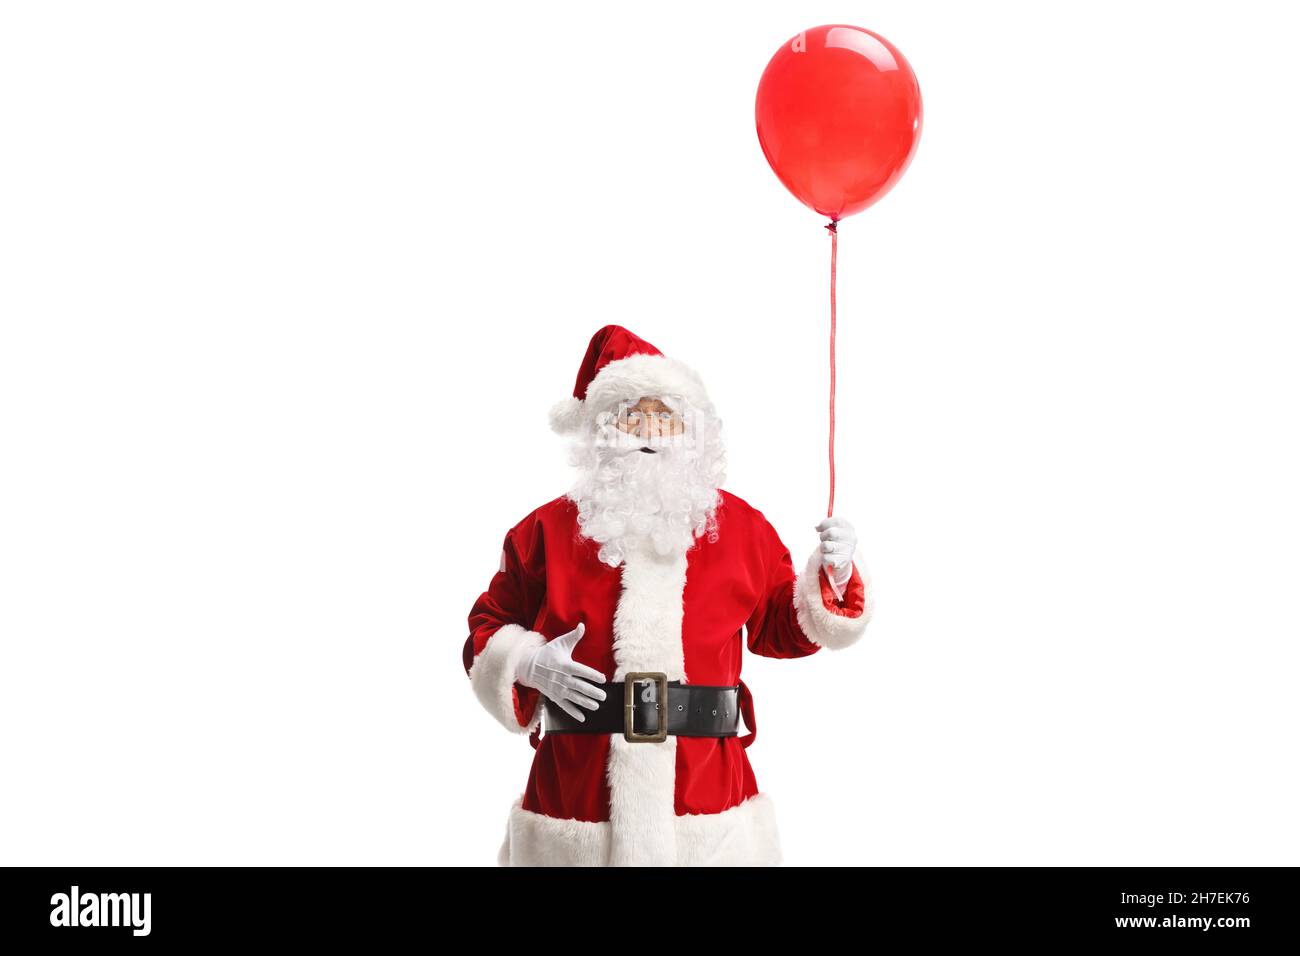 Santa claus holding a red balloon isolated on white background Stock Photo